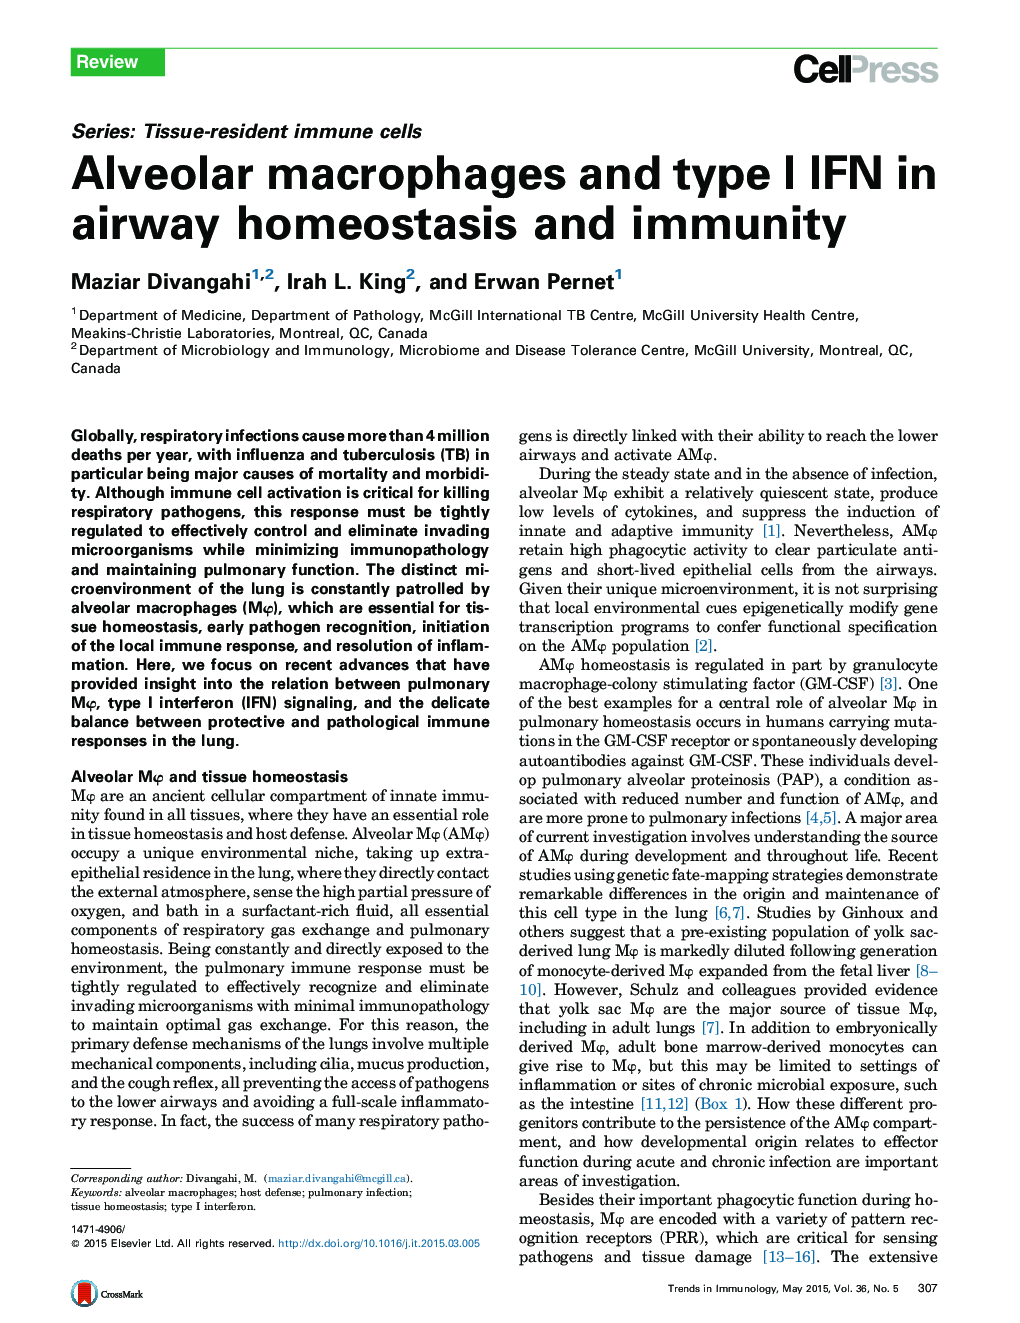 Alveolar macrophages and type I IFN in airway homeostasis and immunity